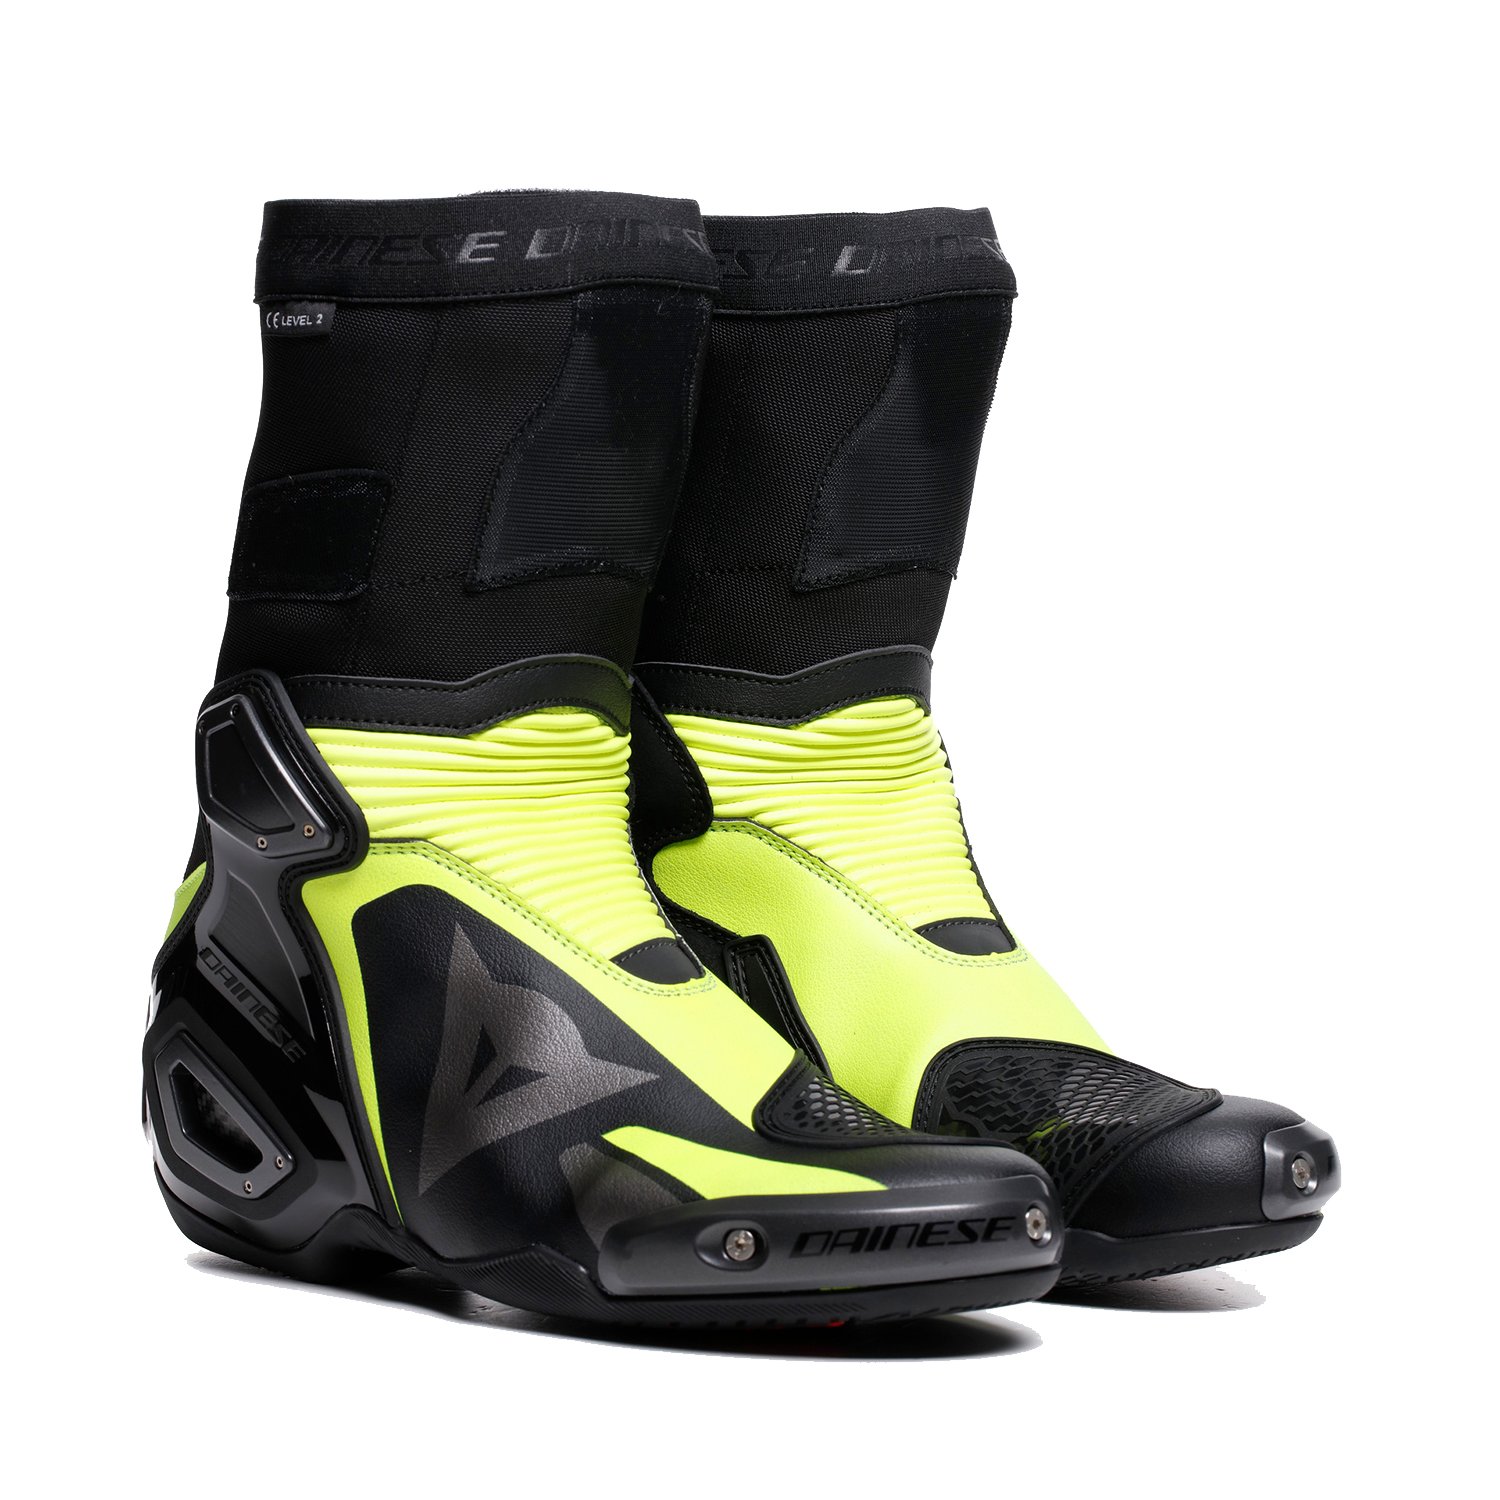 Image of Dainese Axial 2 Boots Black Yellow Fluo Talla 40